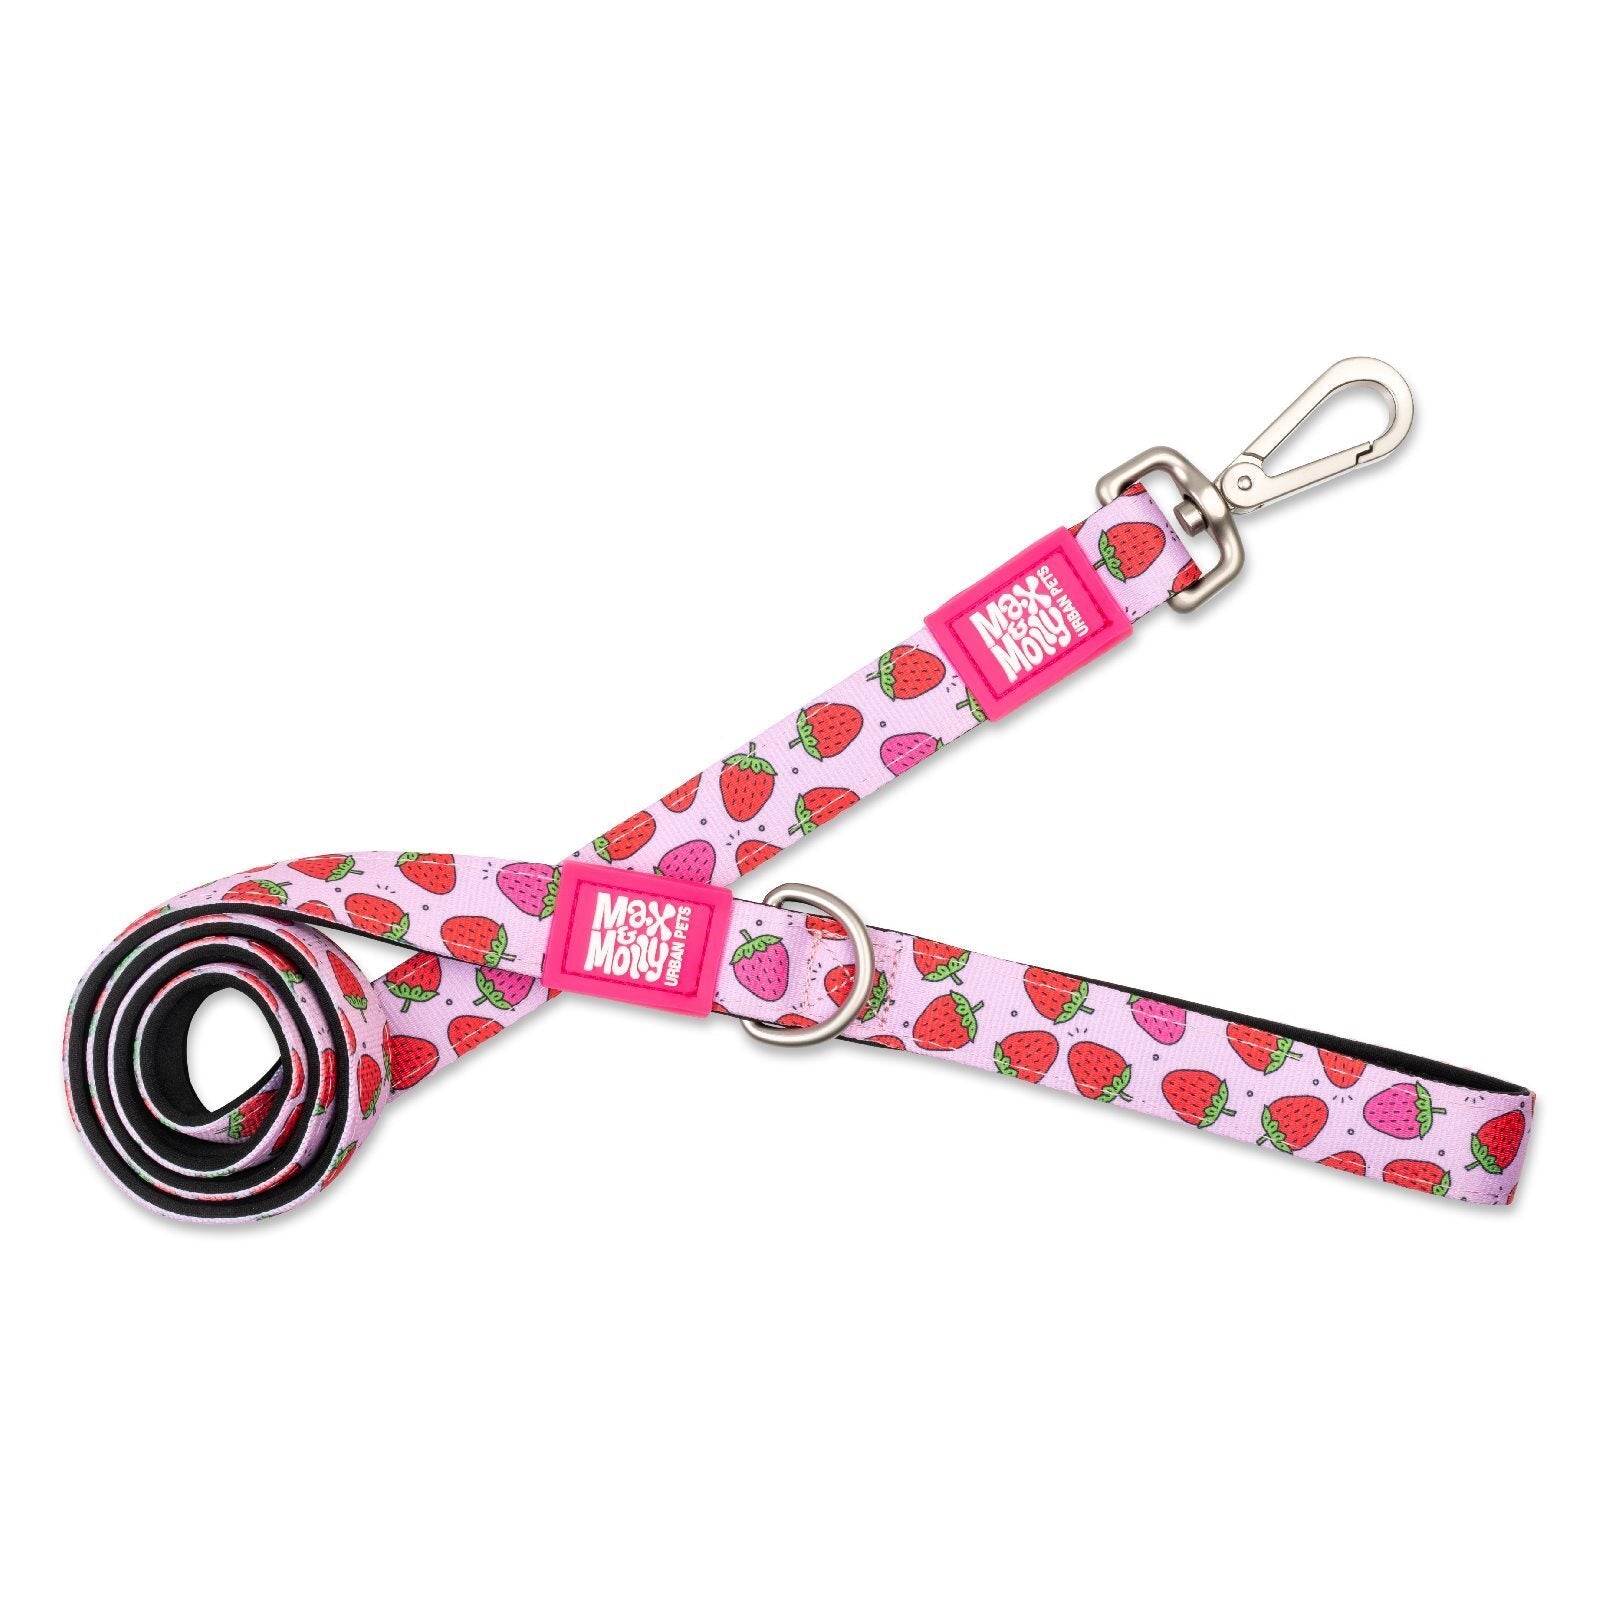 Max & Molly Dog Leash - Strawberries - Pets and More